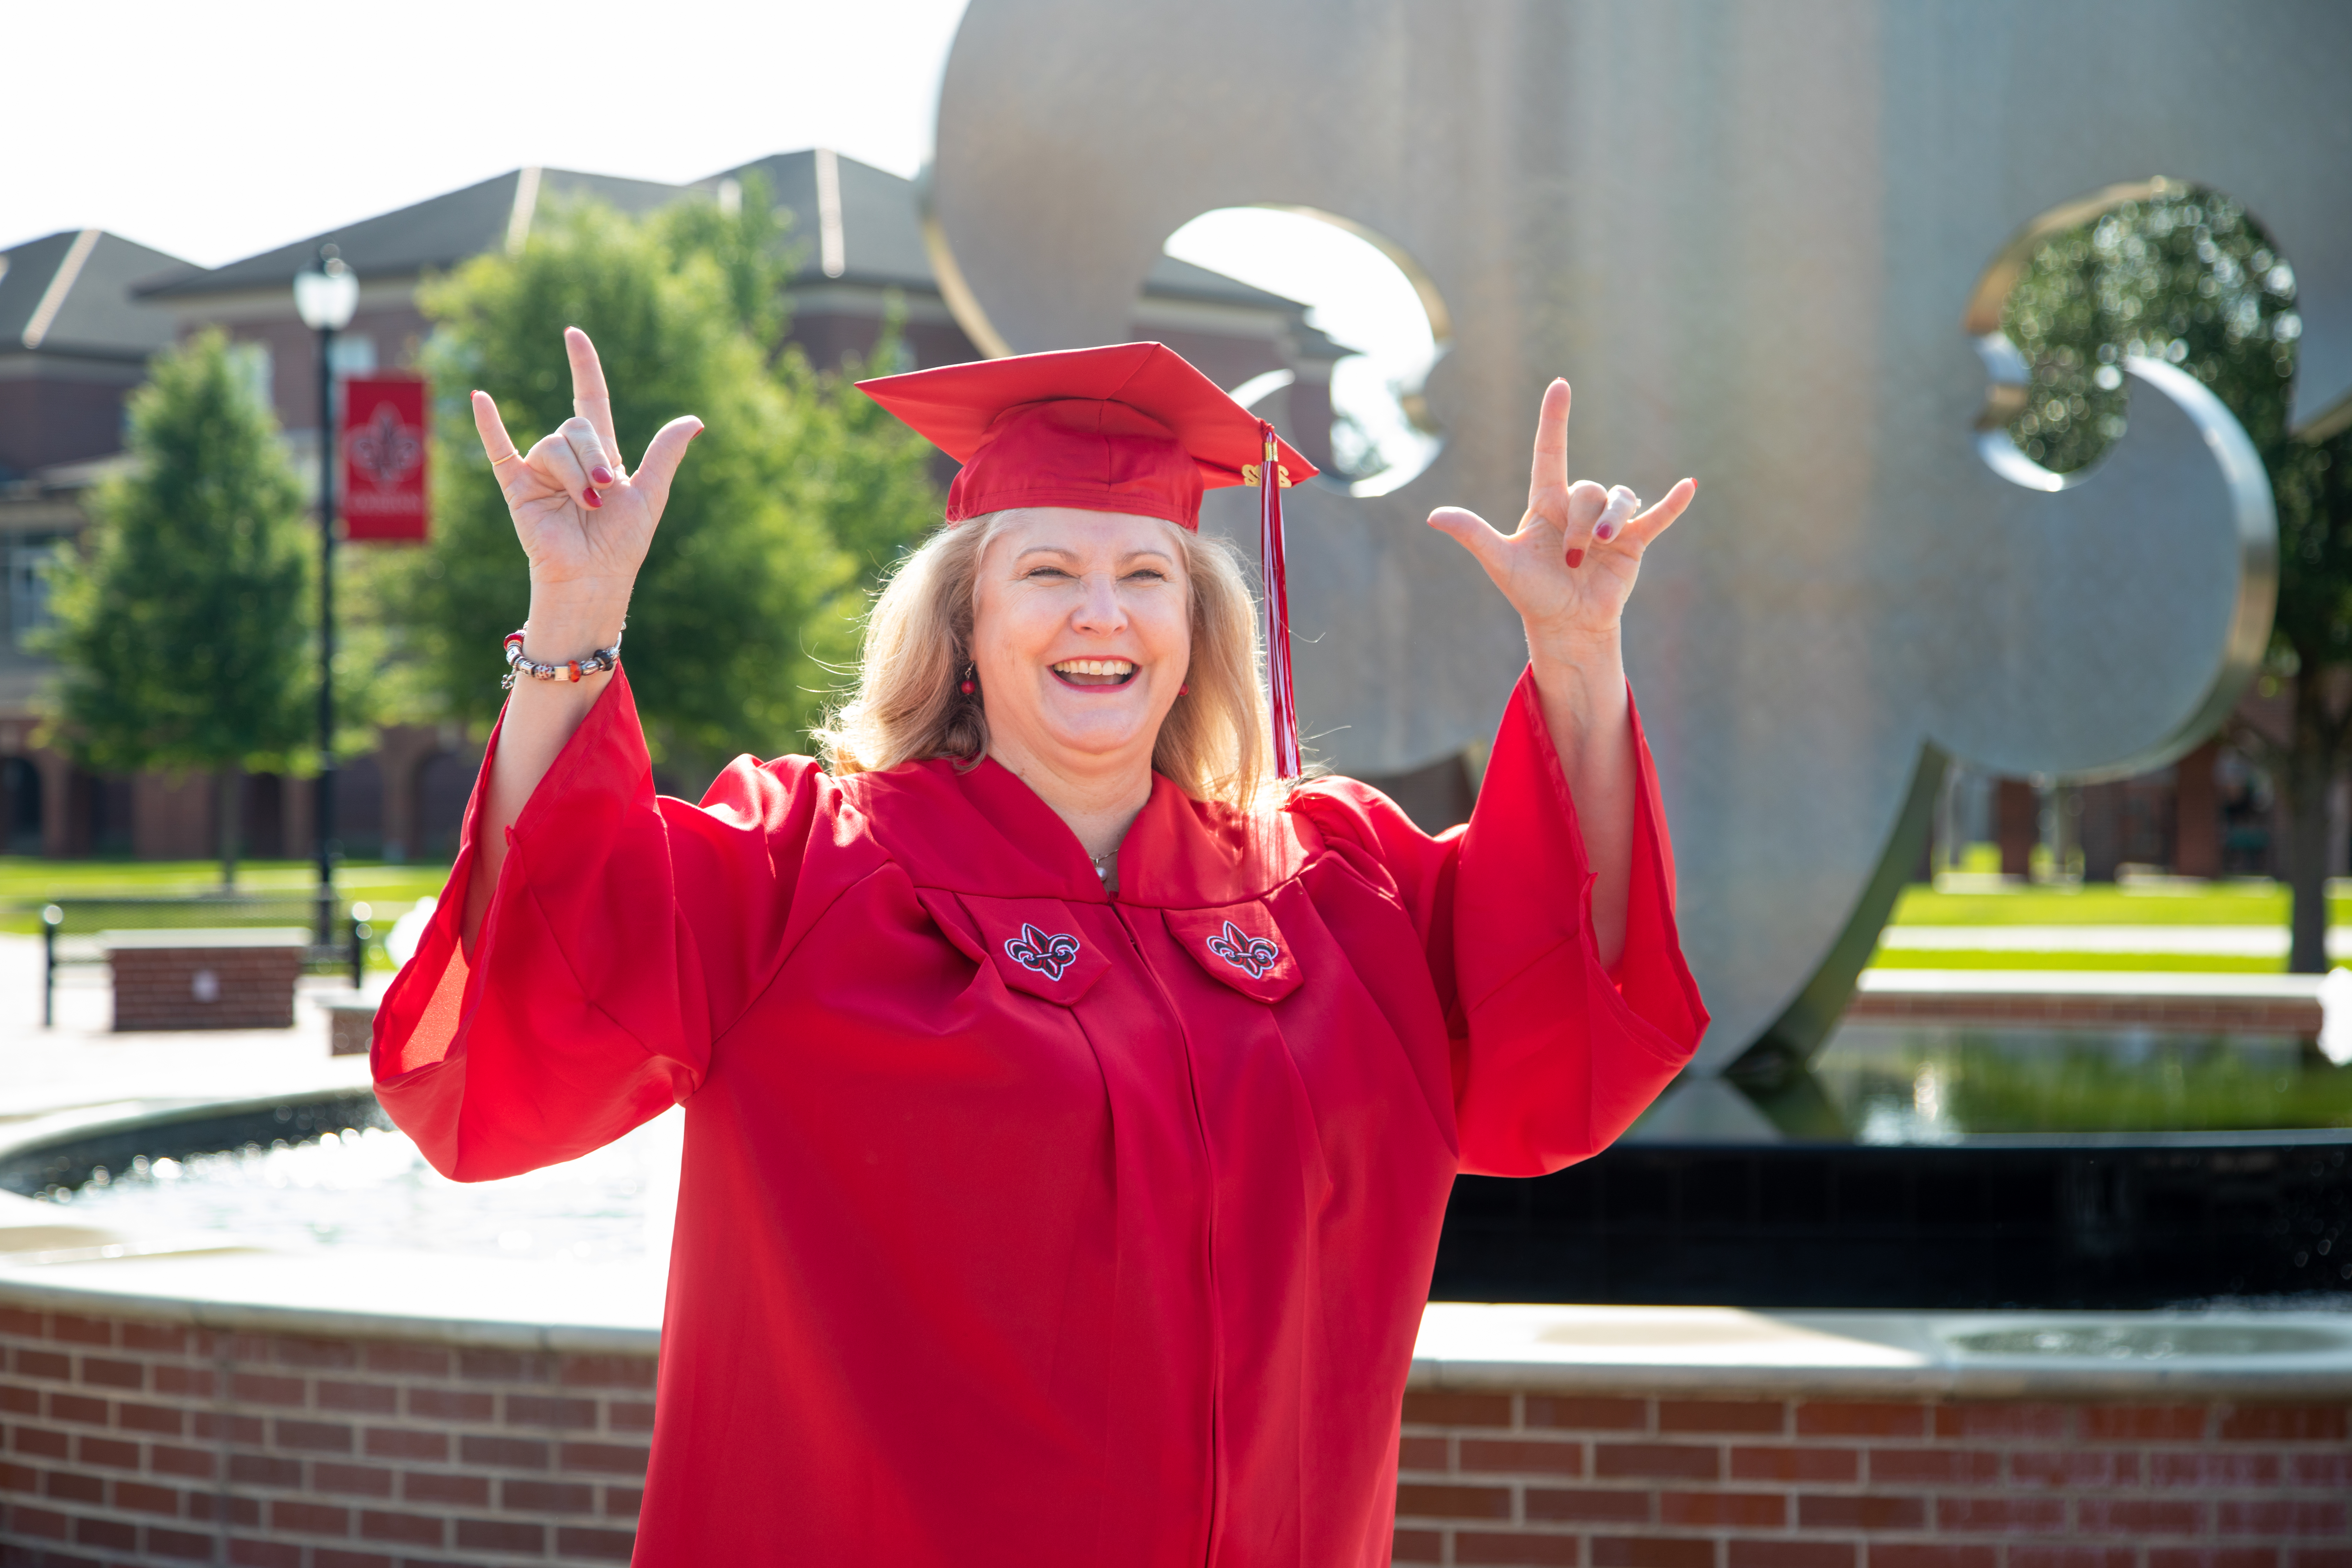 Melanie Fontenot is pictured in the UL Lafayette grad wearing a red graduation cap and gown. Fontenot earned her General Studies degree online at UL Lafayette.